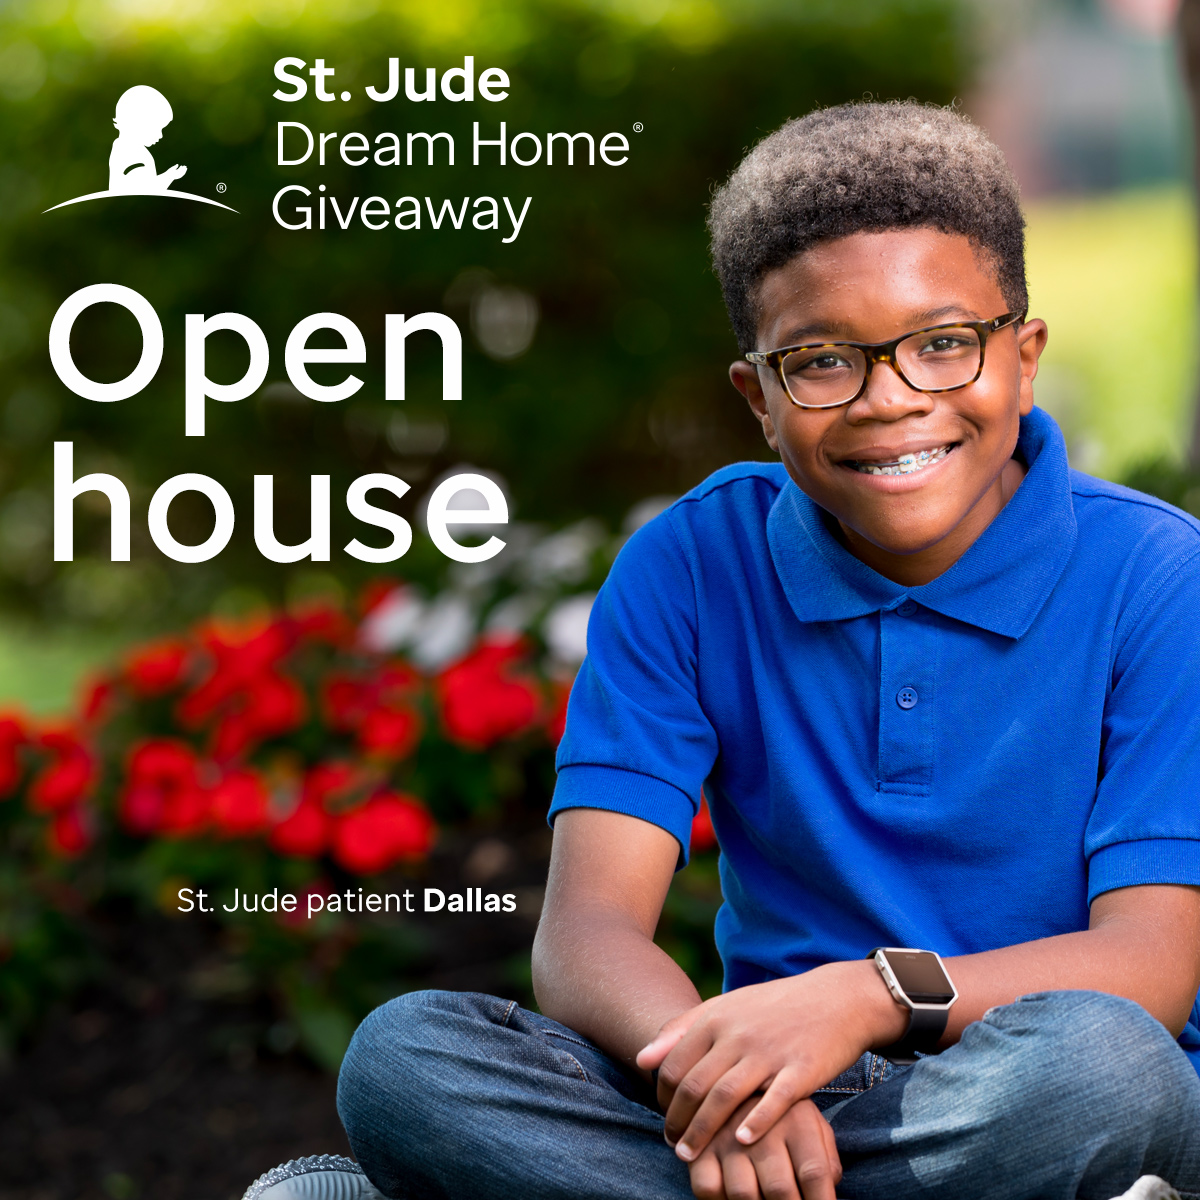 St. Jude Dream Home Giveaway Open House Featuring a St. Jude Dallas Patient